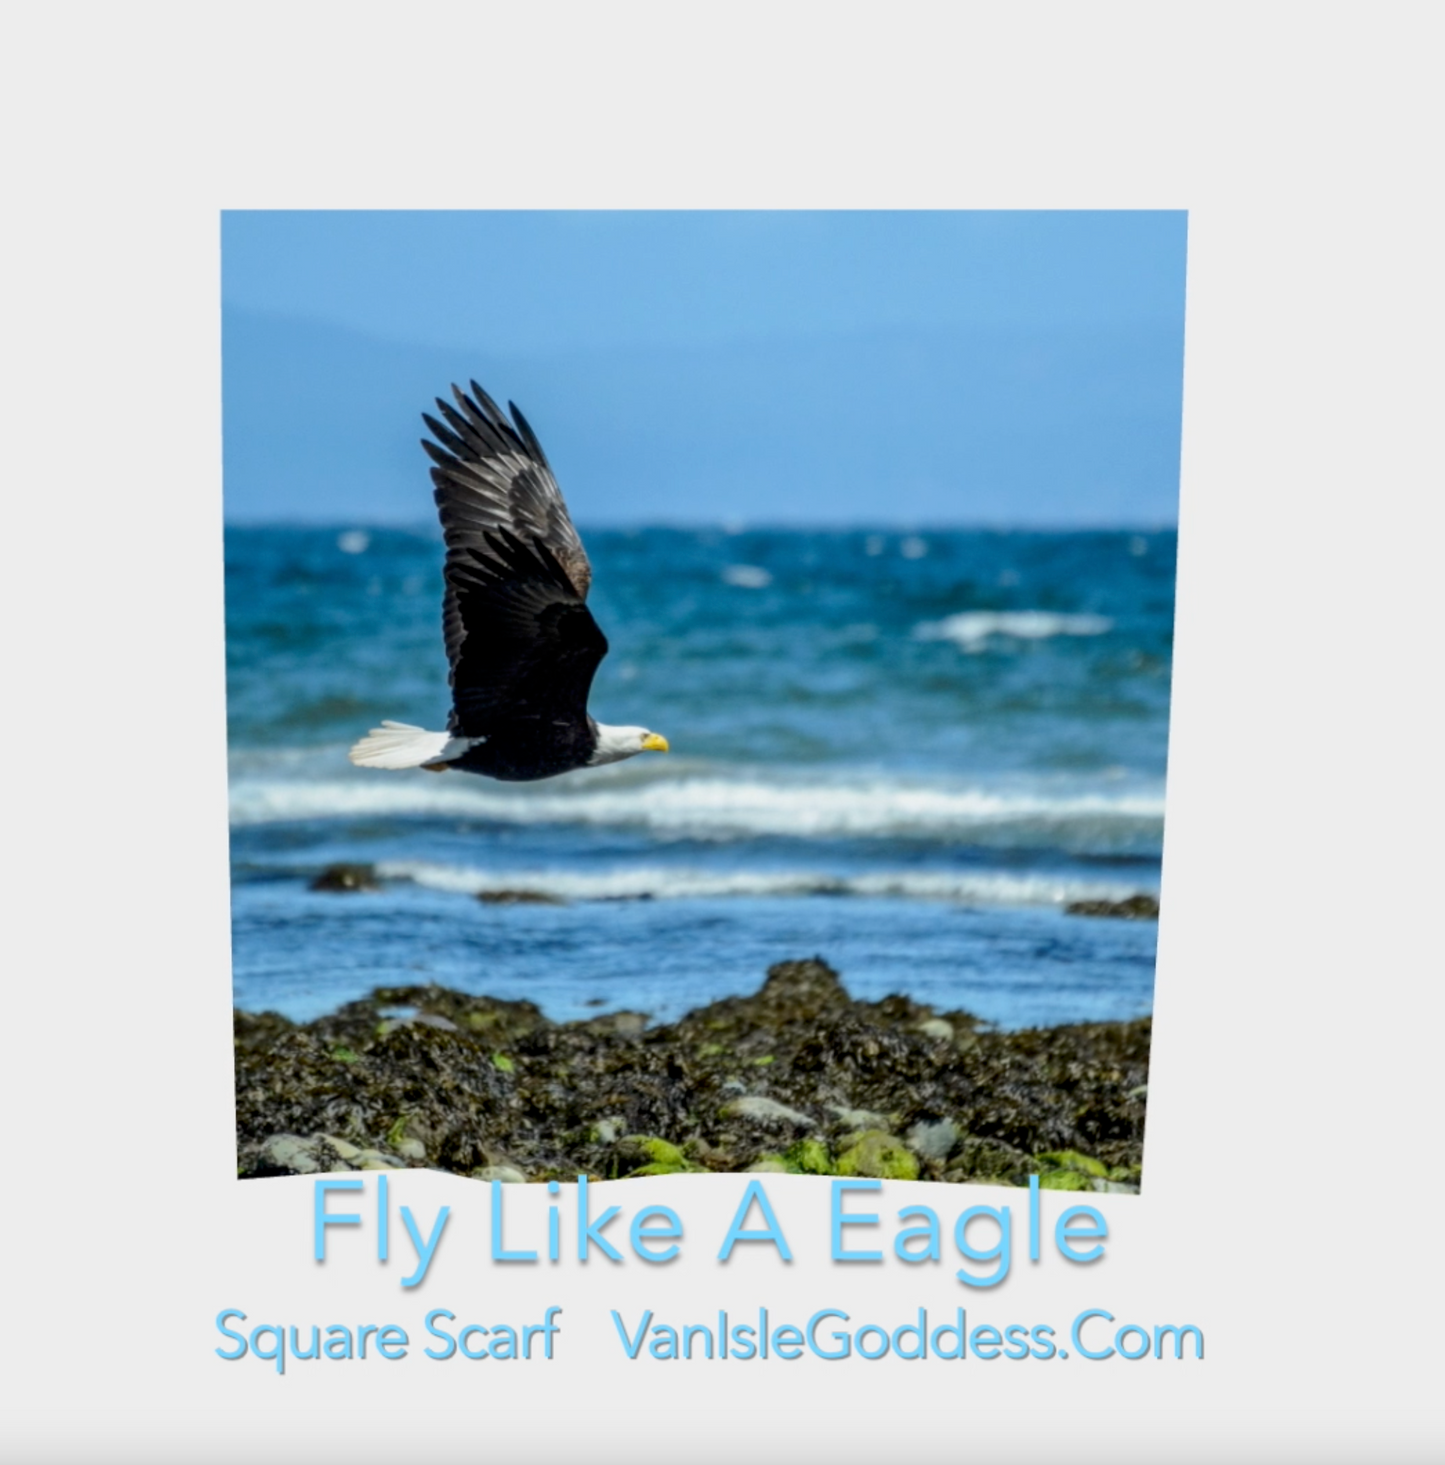 Fly Like A Eagle square scarf shown full size.